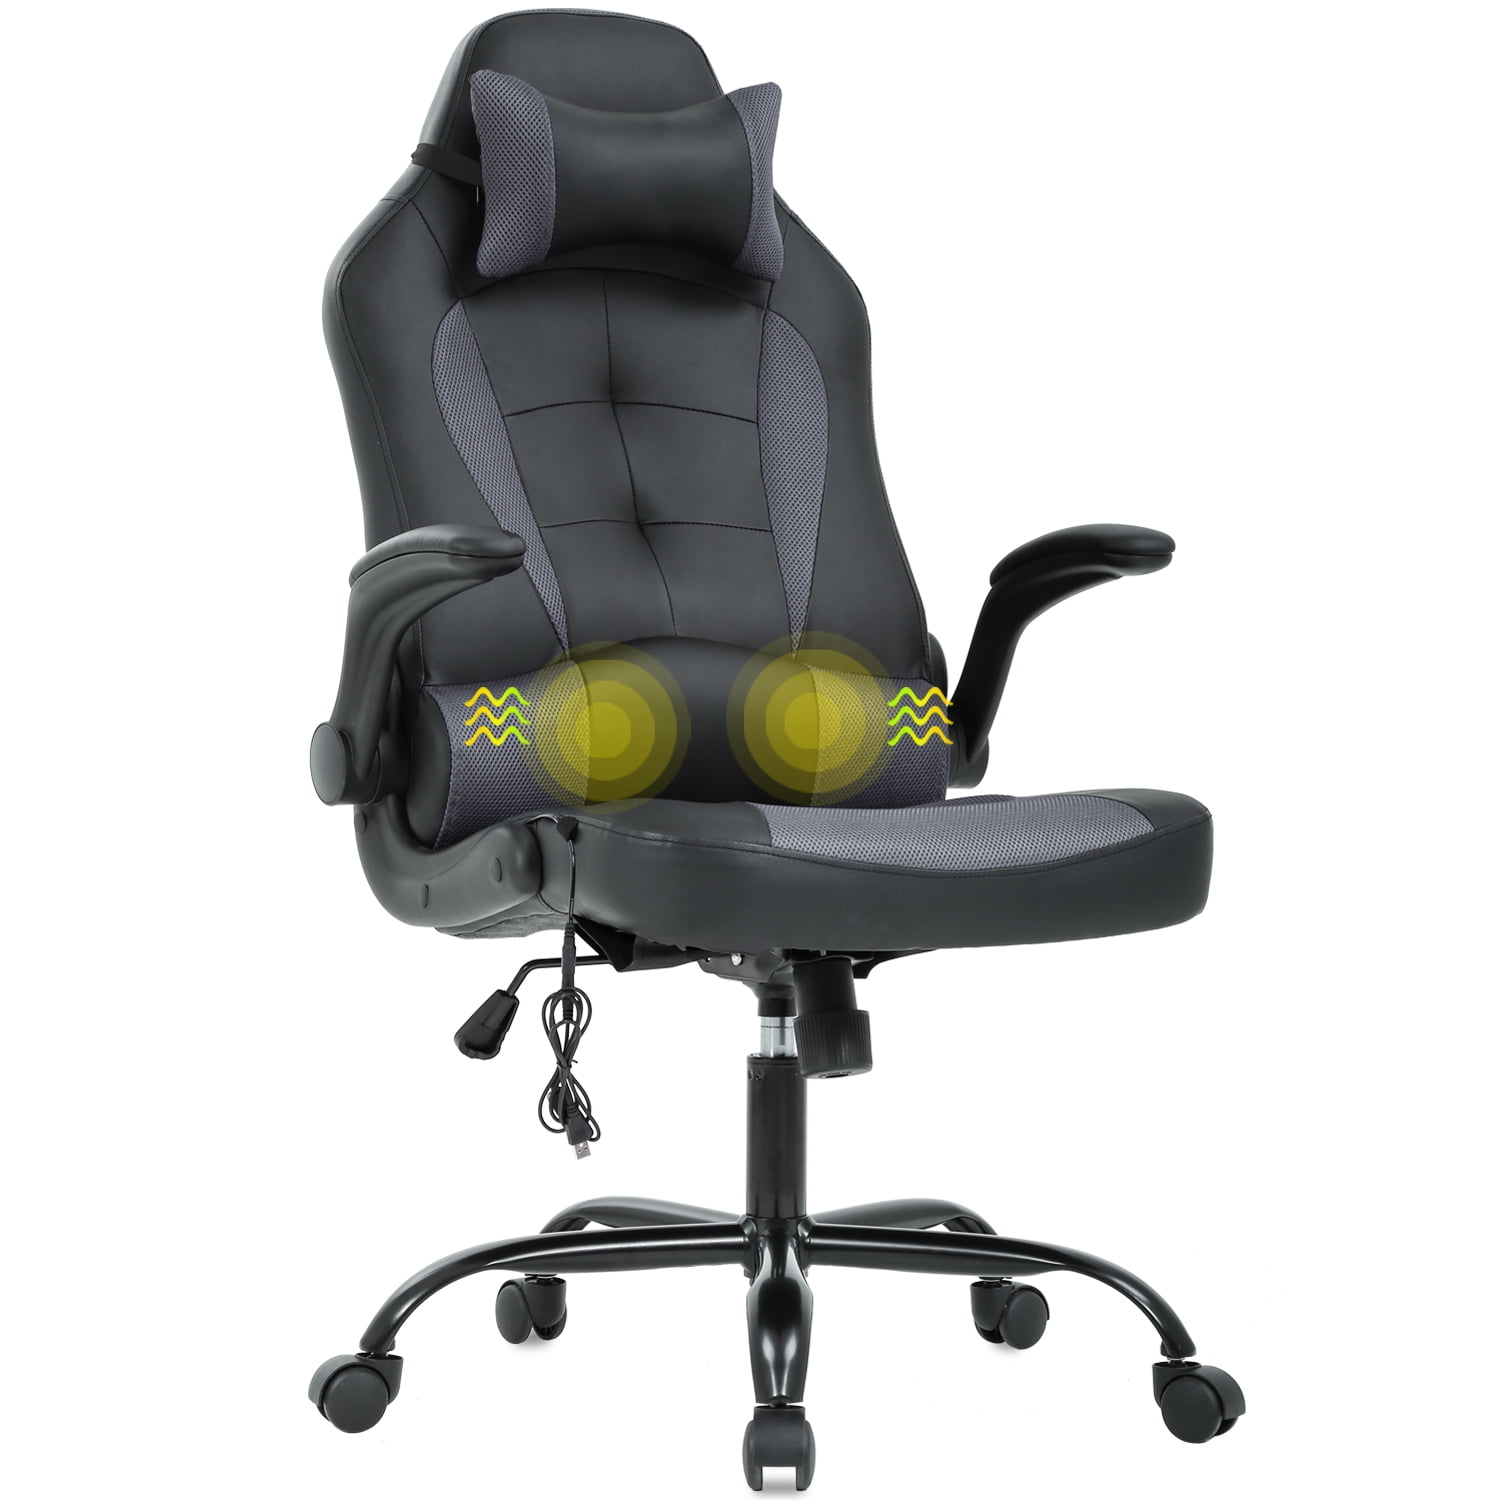 Grey Gaming Chair Ergonomic Executive Office Desk Chair High Back Leather Swivel Computer Racing Chair with Lumbar Support